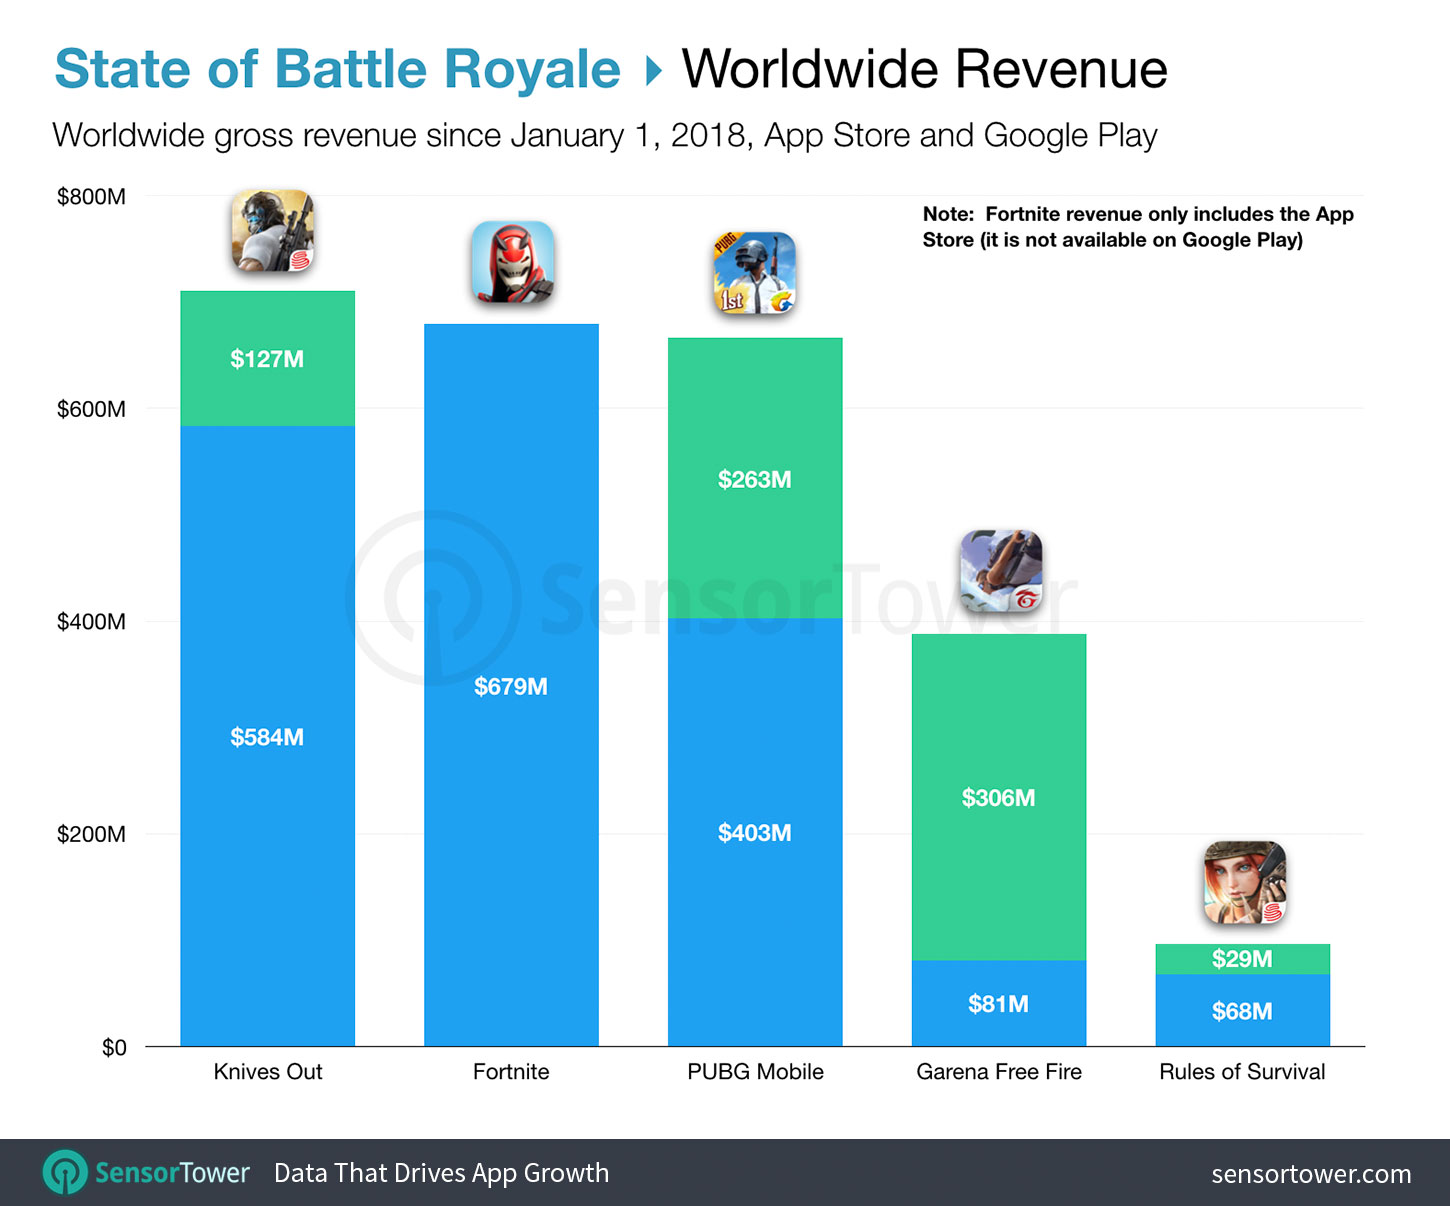 Top Battle Royale Games by Worldwide Revenue since January 2019 by App Store and Google Play